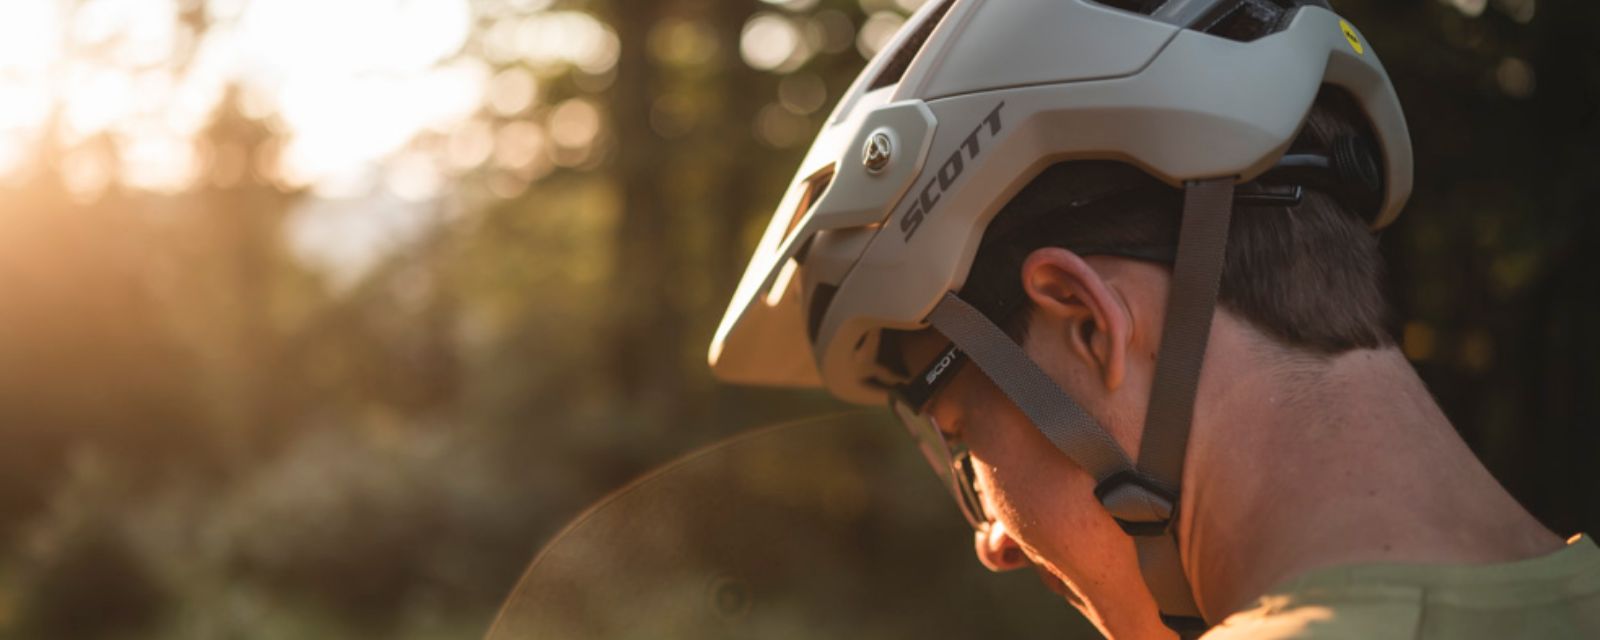 Padding and Comfort in MTB Helmets